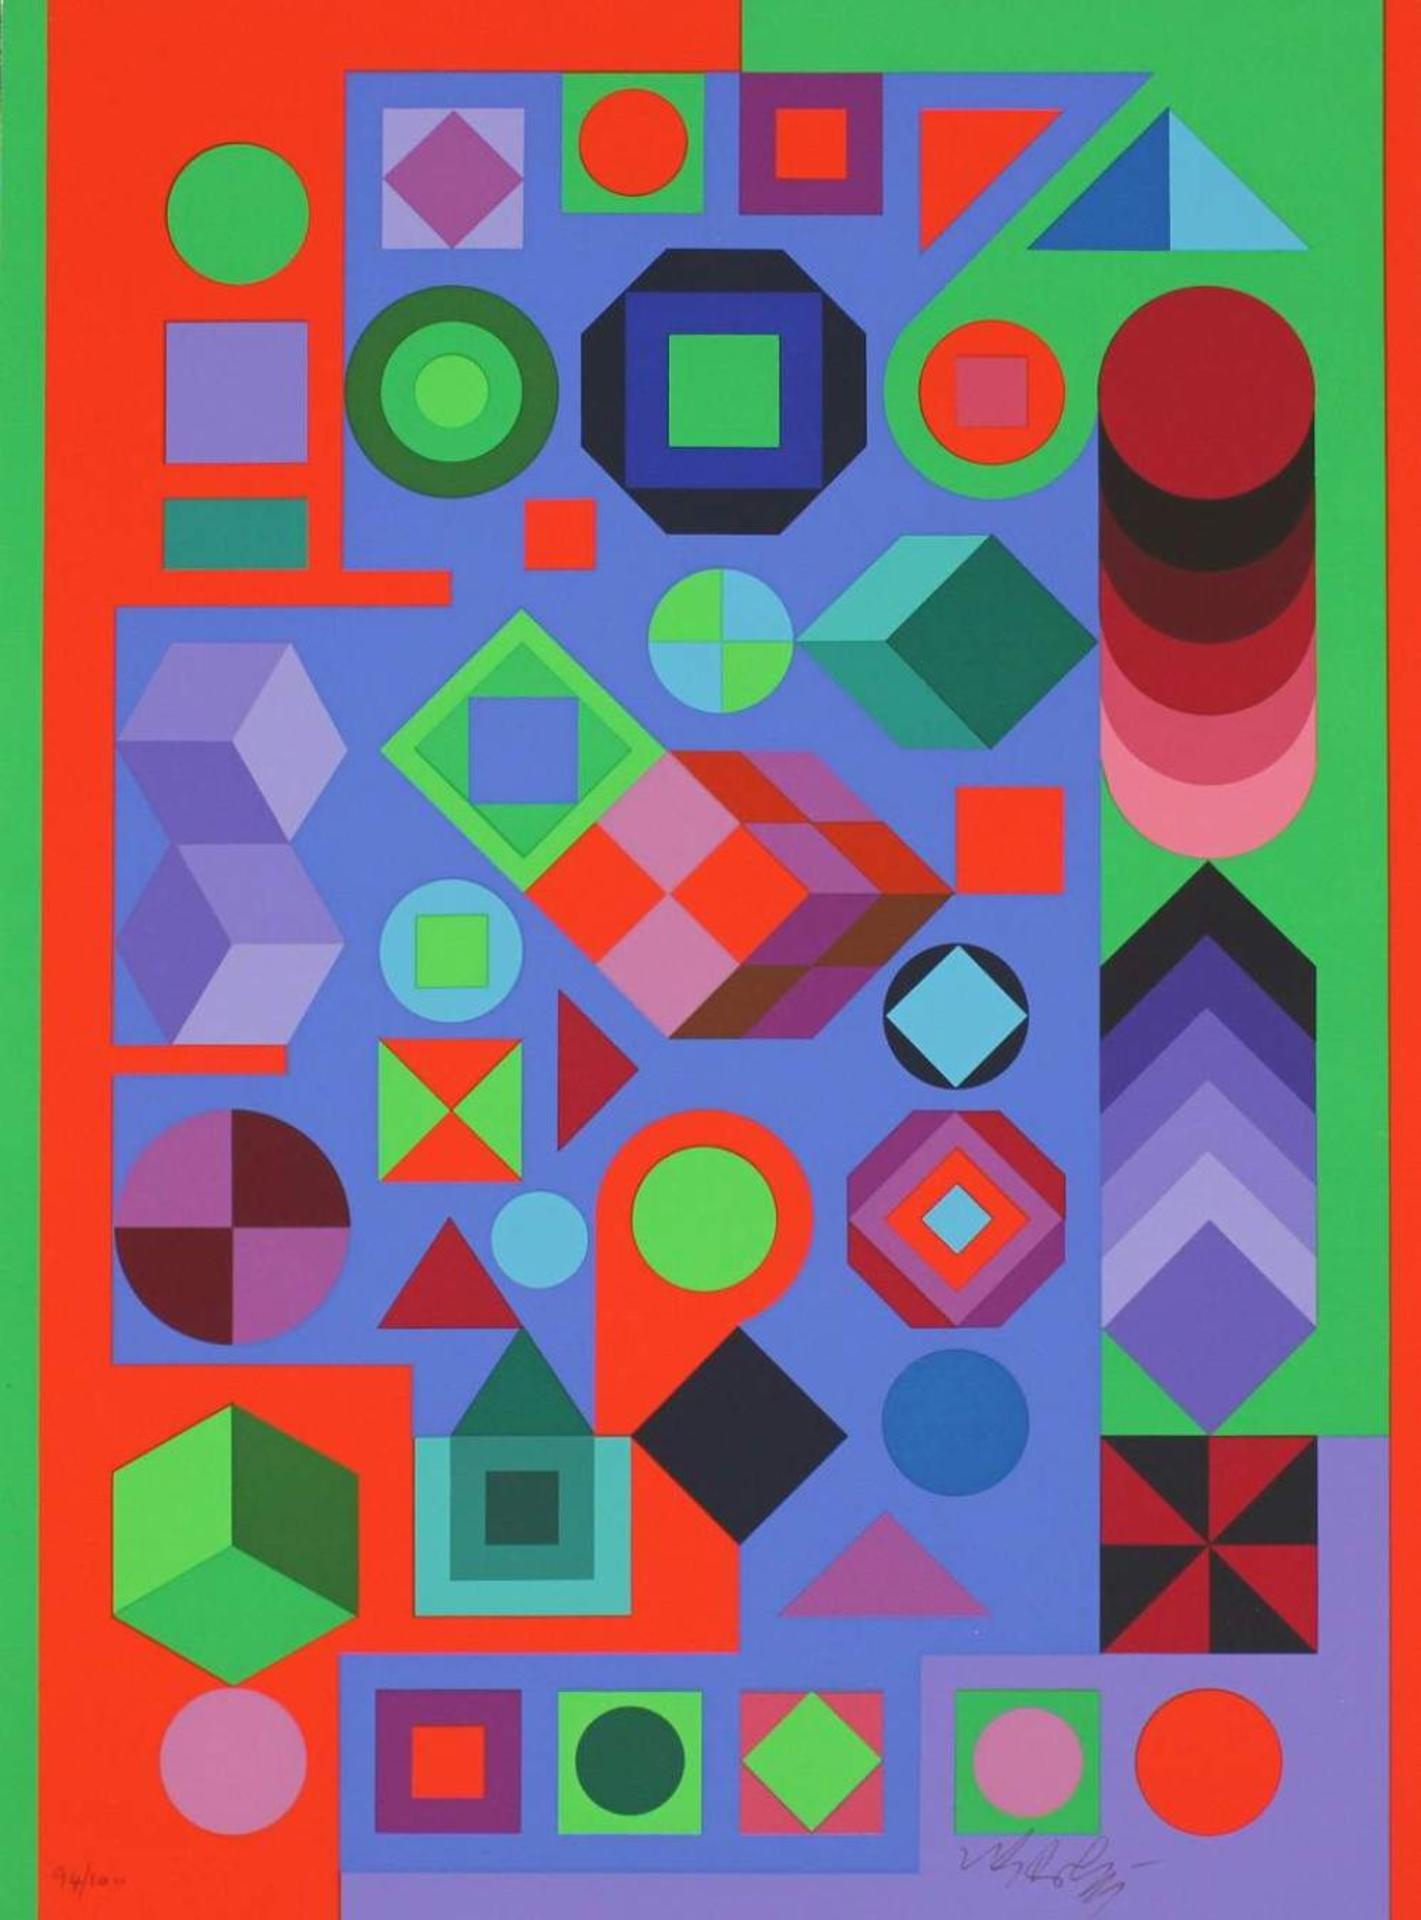 Victor Vasarely (1906-1997) - Untitled